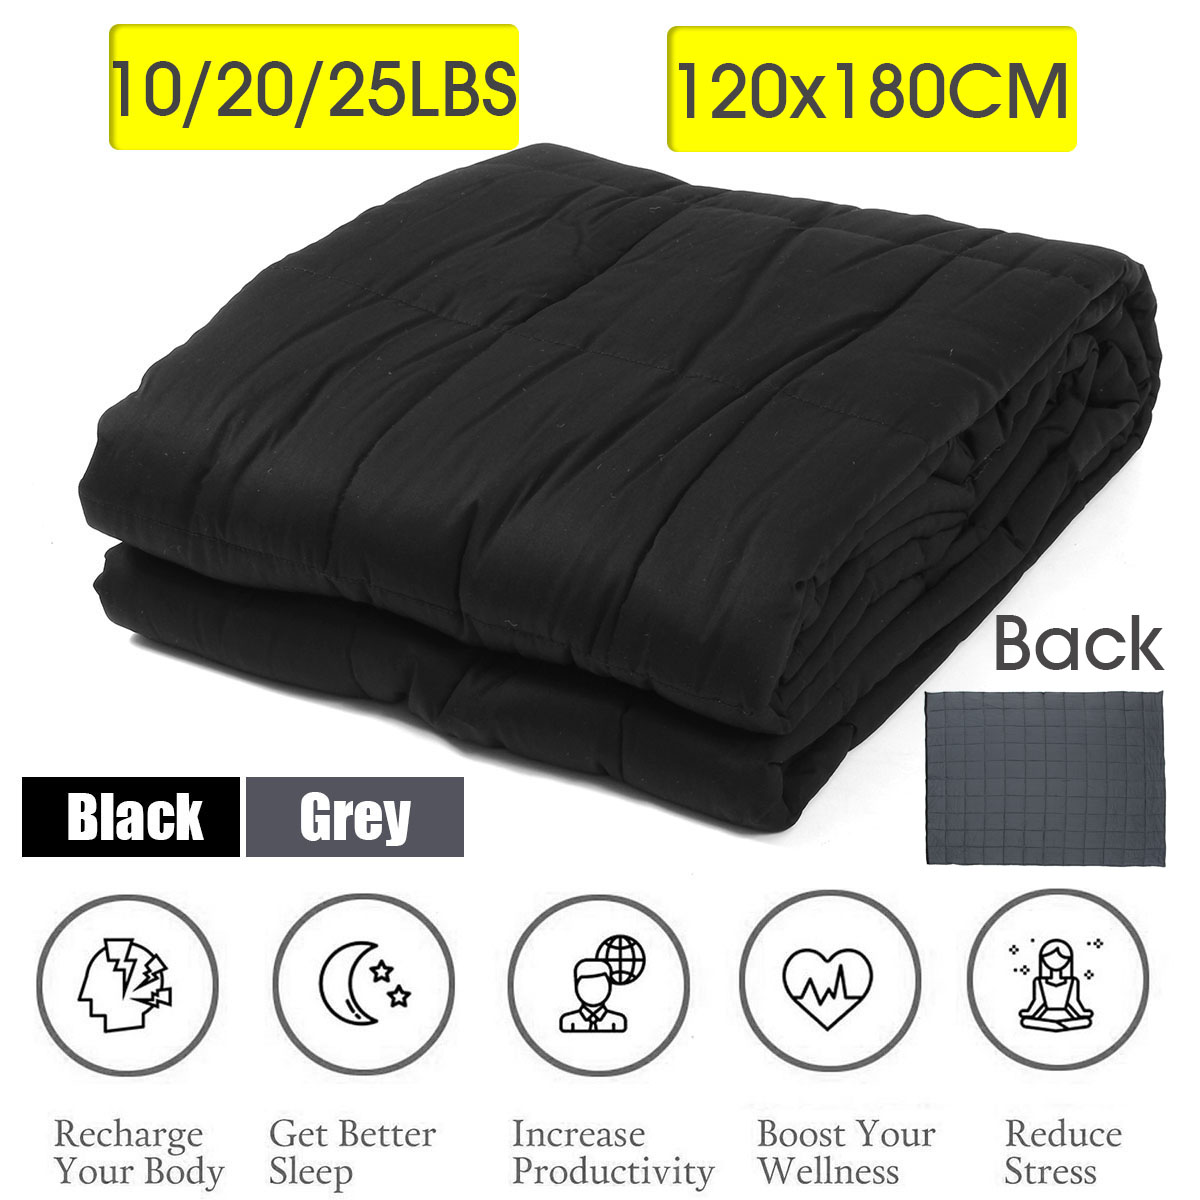 120x180CM-Black-Grey-Weighted-Blanket-Cotton-79115kg-Heavy-Sensory-Relax-Blankets-1349466-10